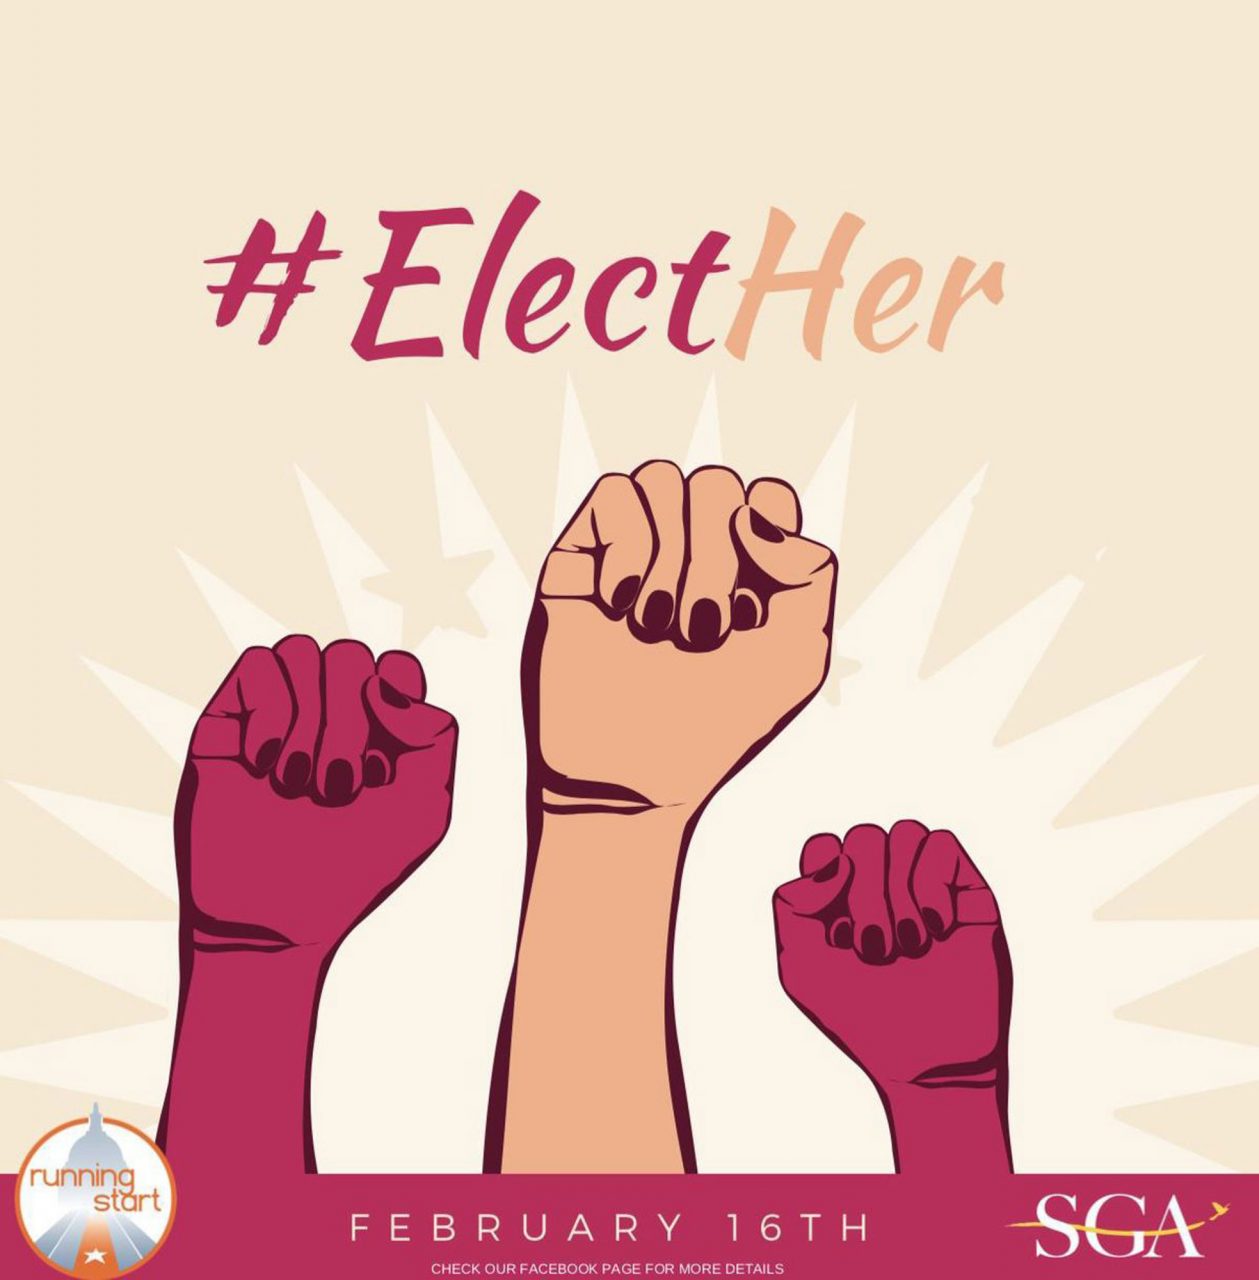 Elect+Her+is+a+program+that+trains+college+women+to+have+more+of+a+representation+in+leadership+roles+and+to+run+for+student+government.+The+event+is+on+Friday%2C+February+16th+and+is+hosted+by+SGA.